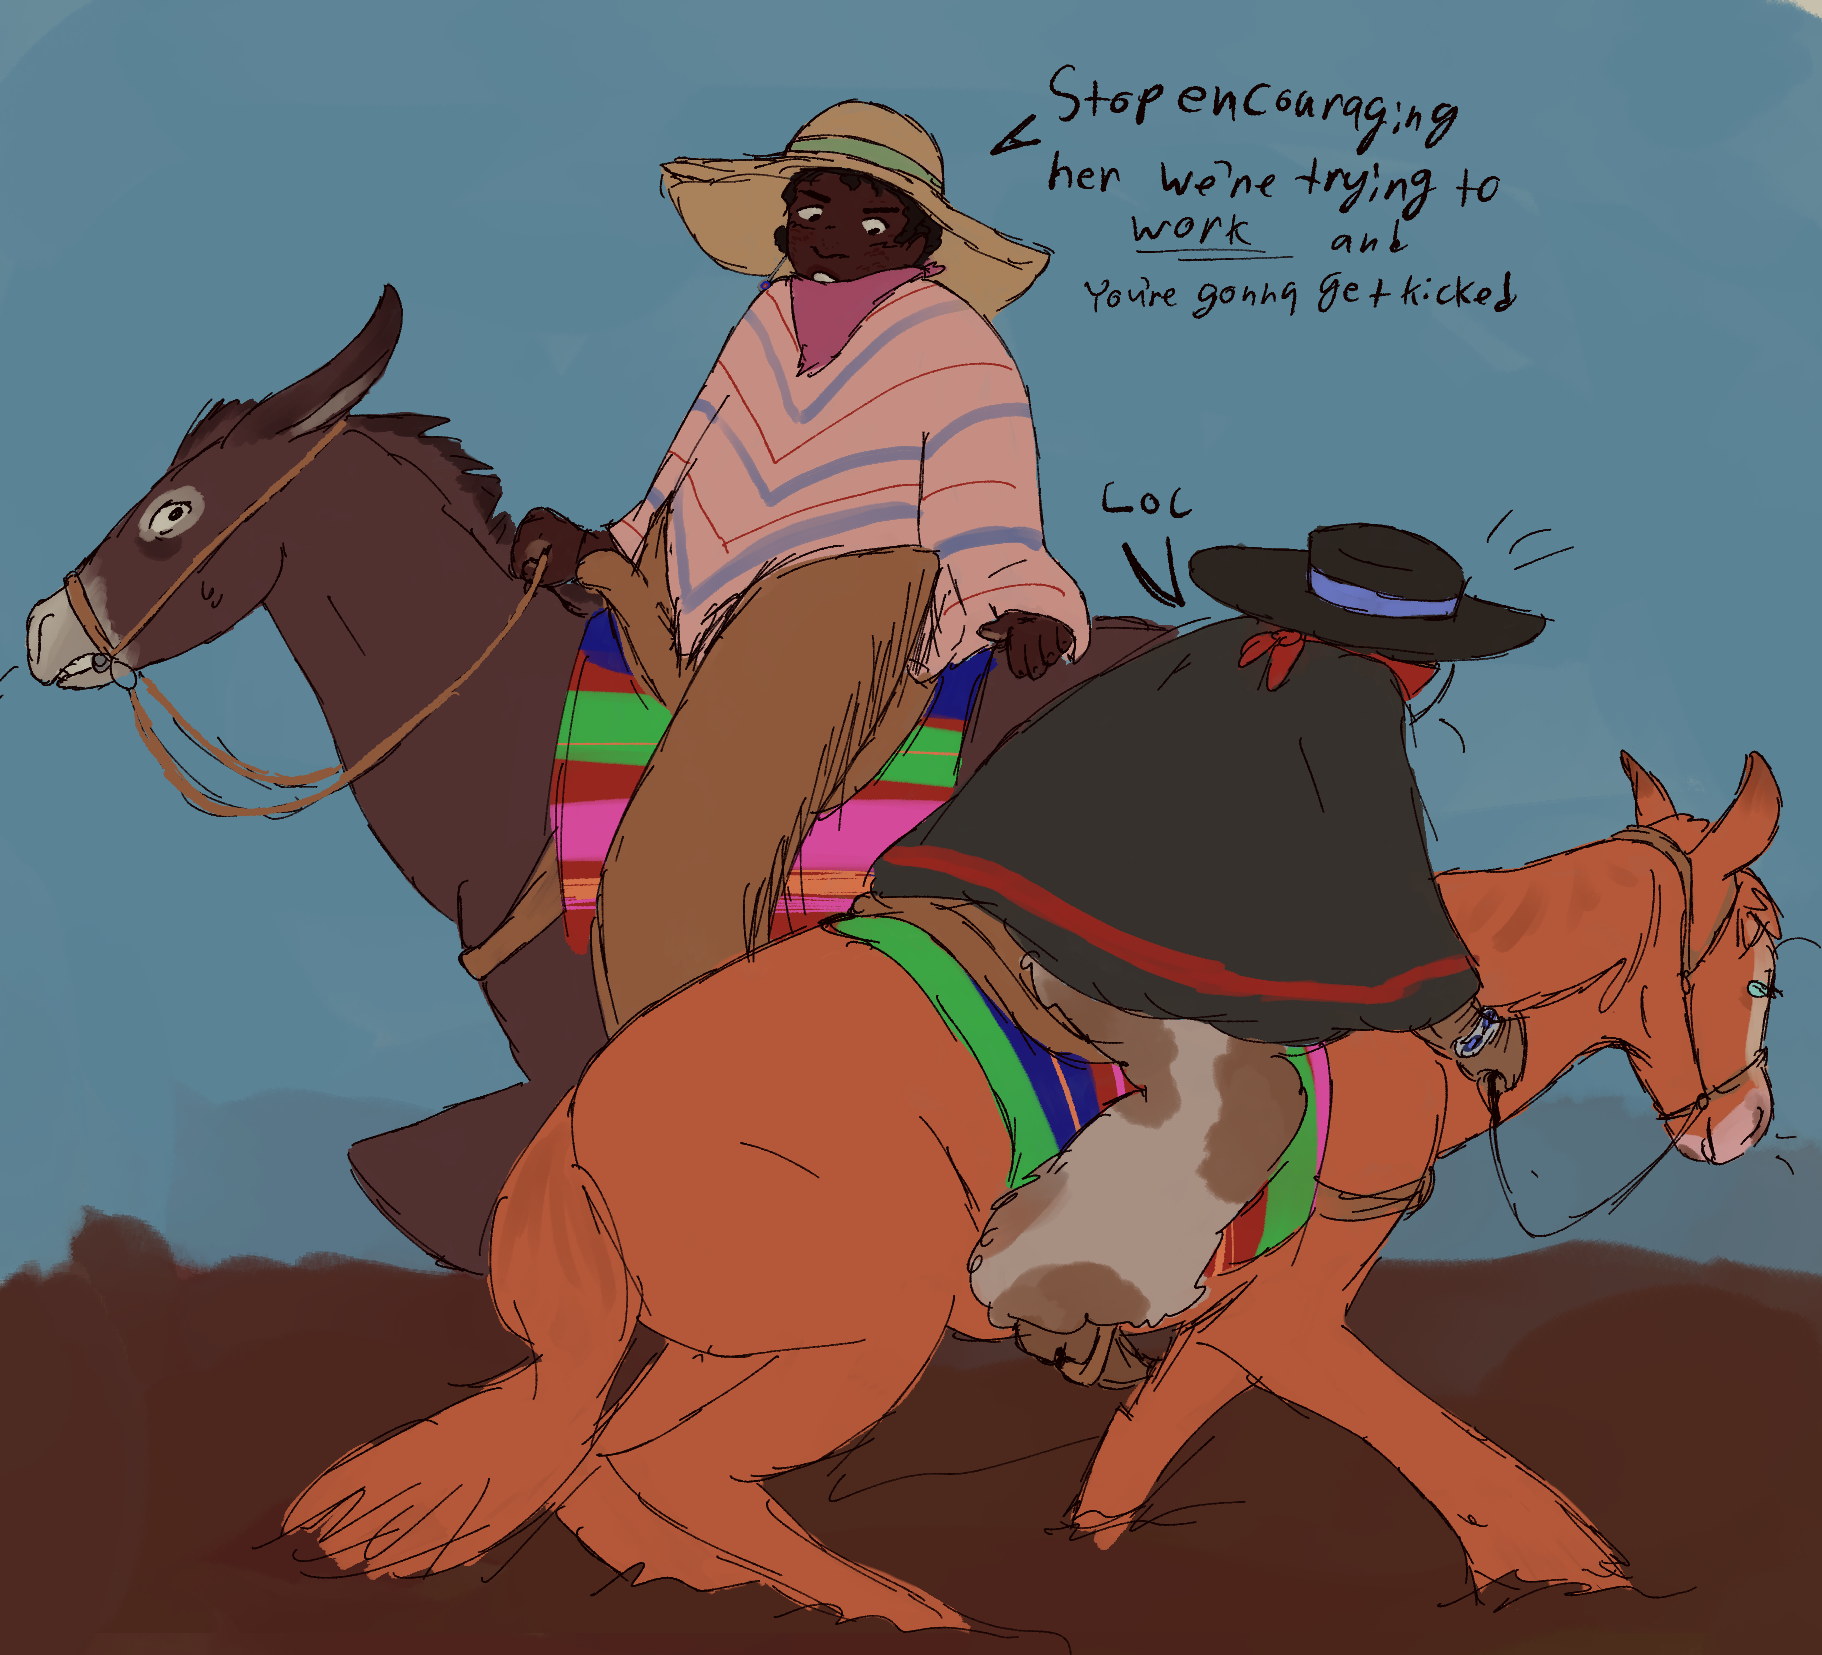 A drawing of Mallory, xer mule Sable, Warbler and Maverick. Mallory wears a large floppy straw hat with a green ribbon, a pinkish bandana, a peach poncho with blue and red stripes, and fringed leather chaps. Xe looks annoyed. Xe says to Warbler 'Stop encouraging her, we're trying to work and you're going to get kicked.' Sable is a dark brown mule with white nose and eye markings. He wears a saddle, reigns with a bit, and a brightly colored striped saddle blanket. Maverick is crouched into the dirt in full cow-horse mode. She wears a similar saddle blacket and bitlesss reigns. Warbler is looking away from the camera, face obscured by hat and cowl. He says 'lol'